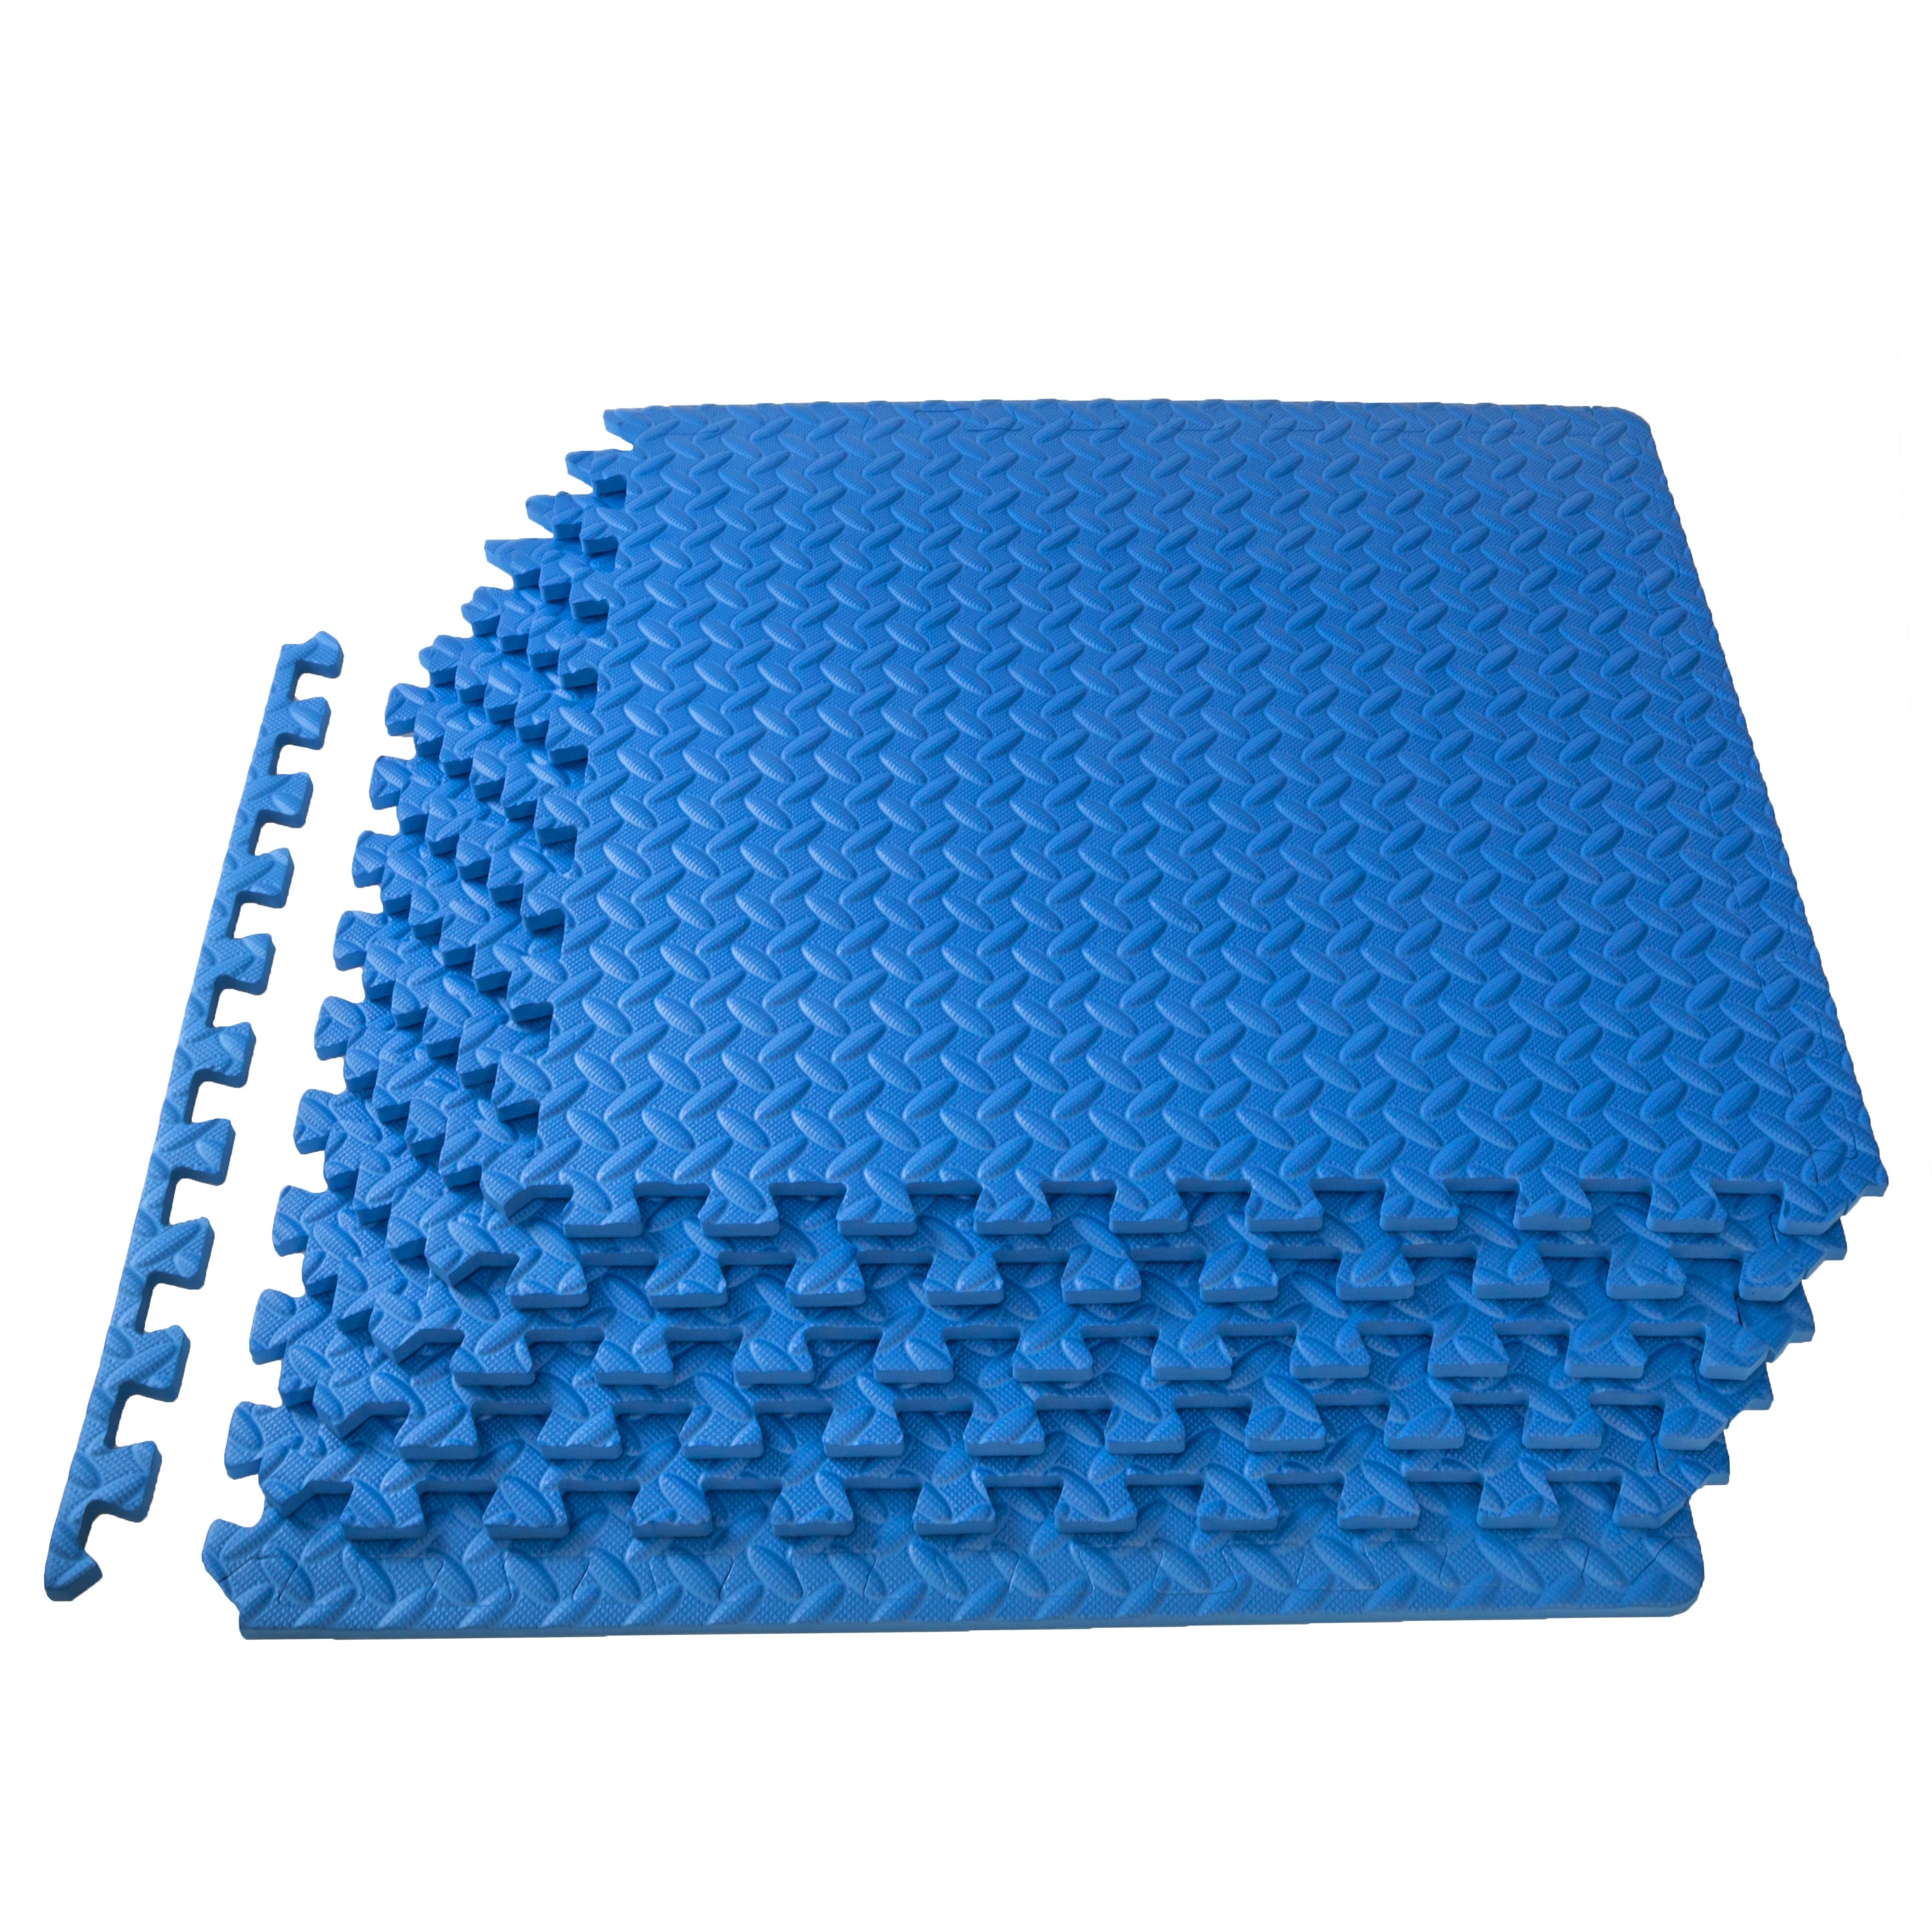 Exercise Protective Flooring for Gym Equipment and Cushion for Workouts 6/12/24/36/42/48 Pcs in 9 Colors EVA Foam Interlocking Tiles SESSRYMNIR Puzzle Exercise Mat 